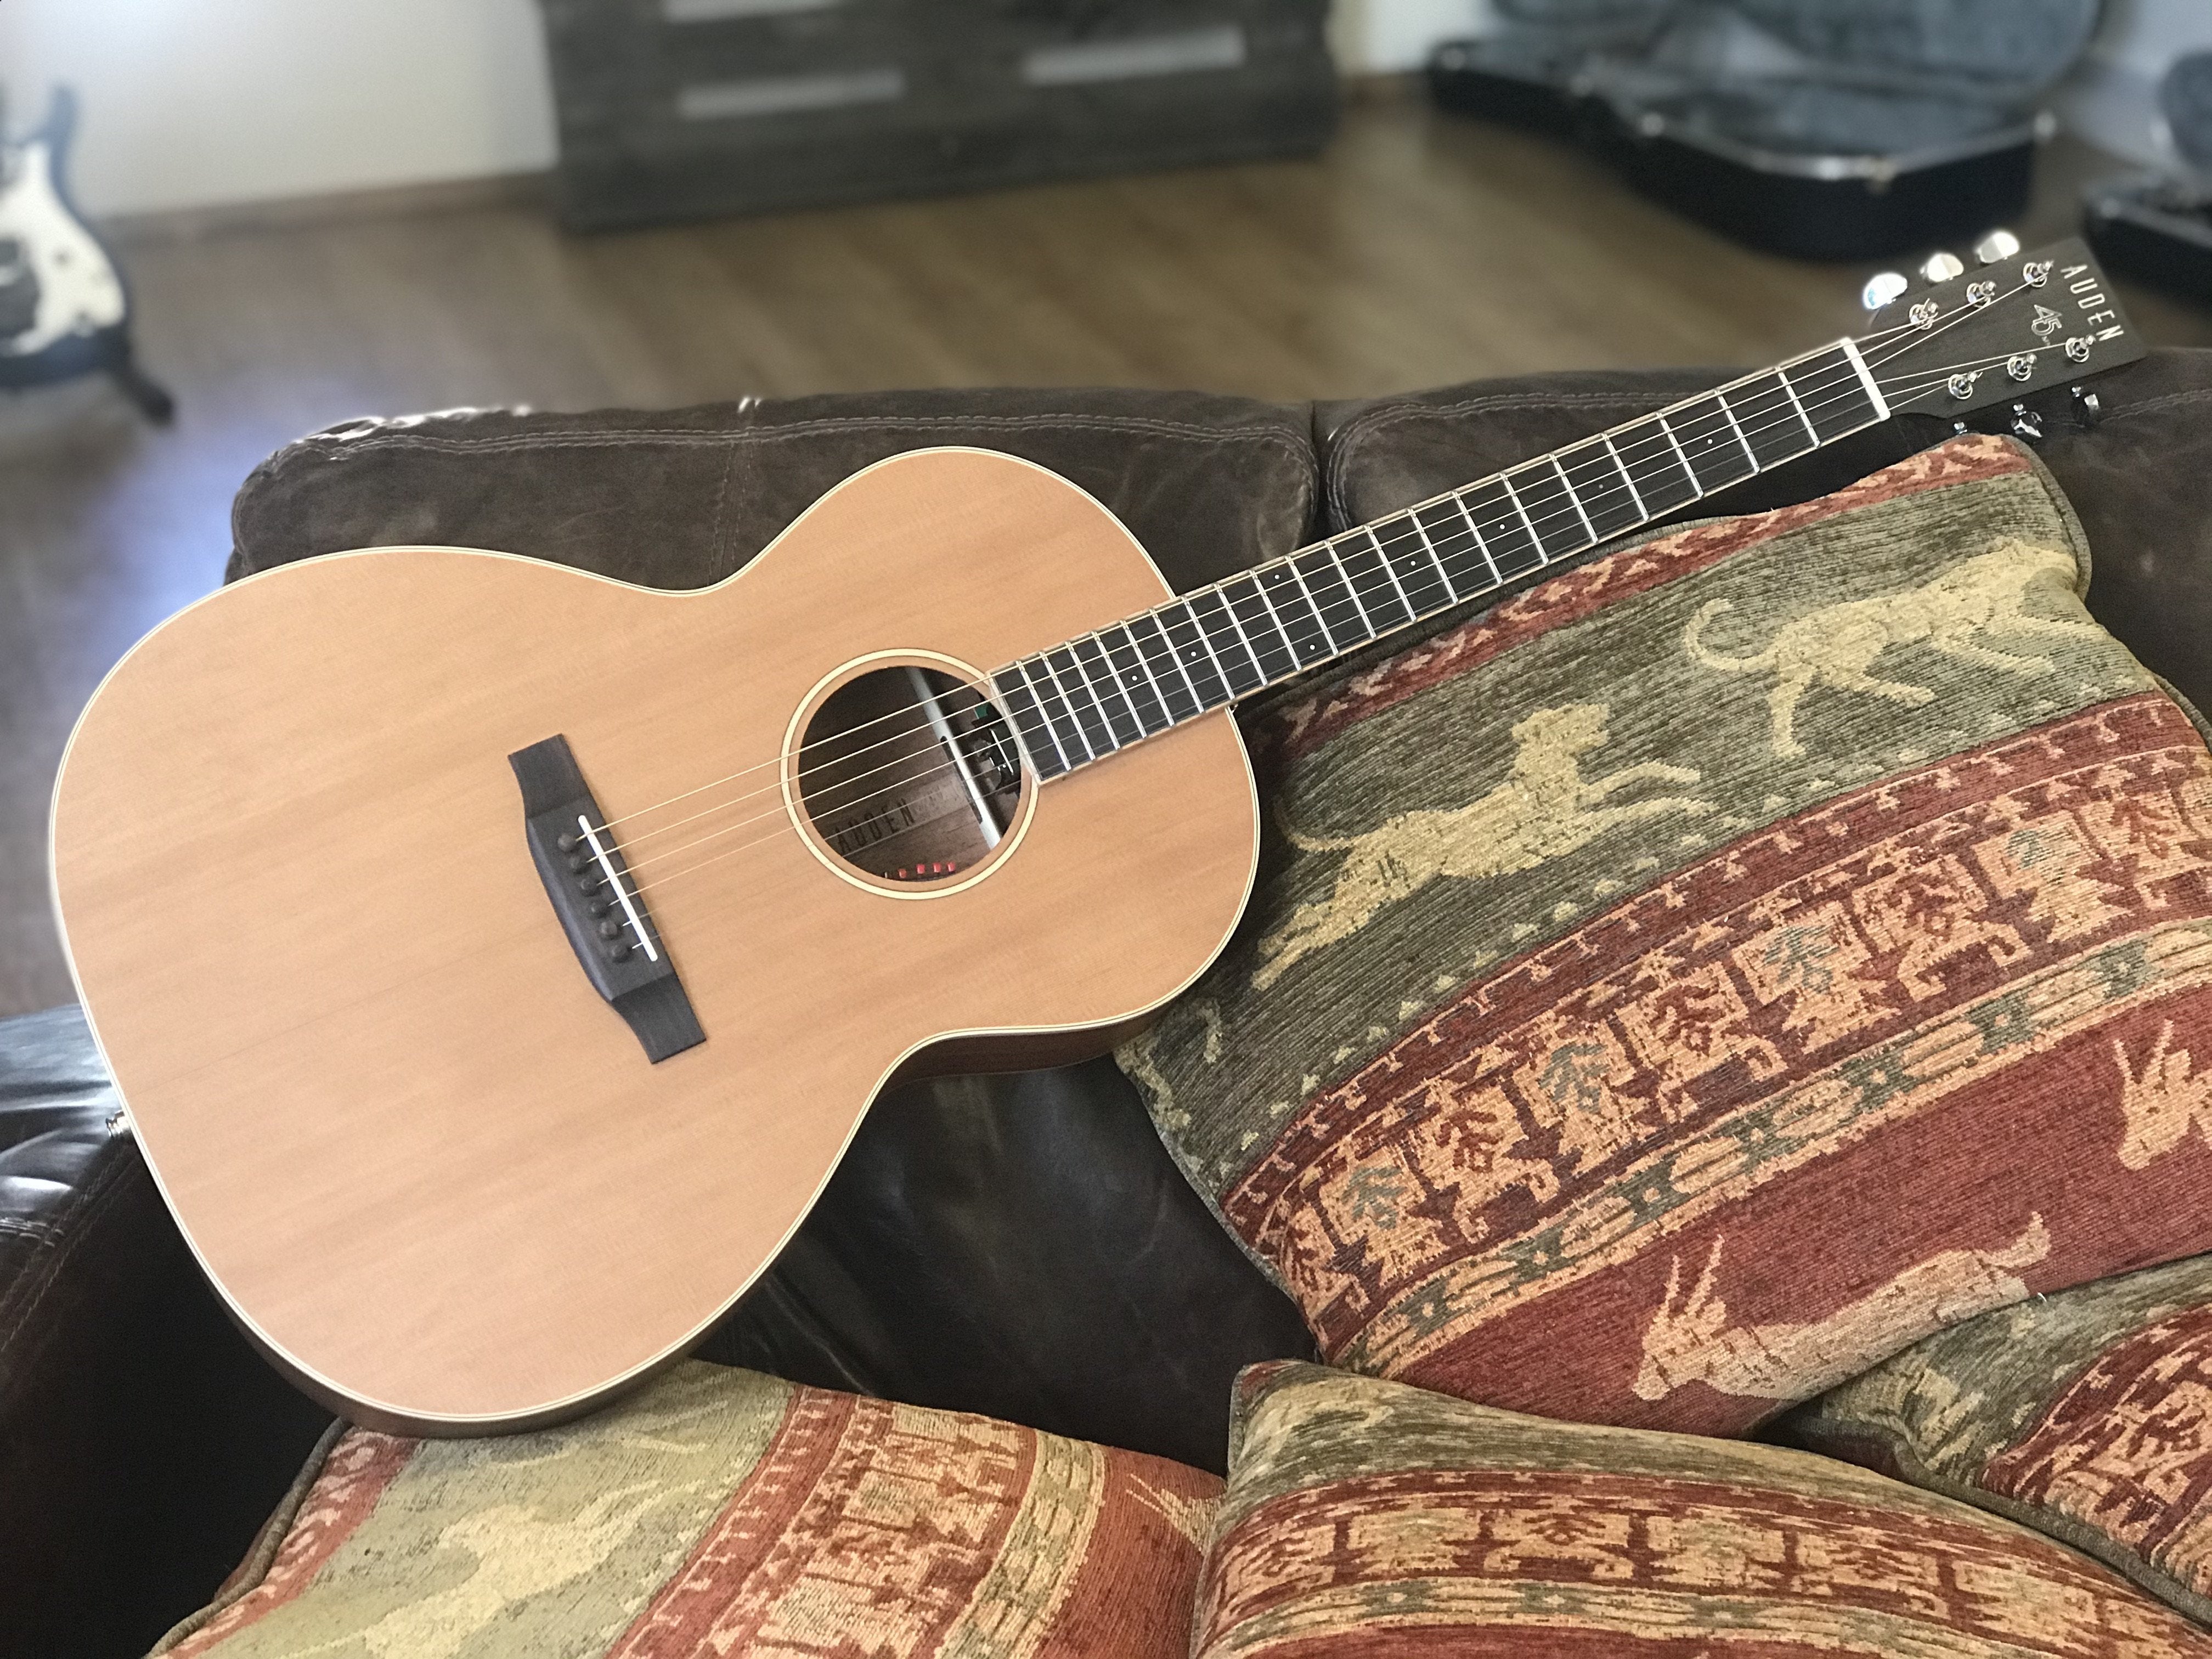 Auden Neo 45 Chester Full Body., Electro Acoustic Guitar for sale at Richards Guitars.